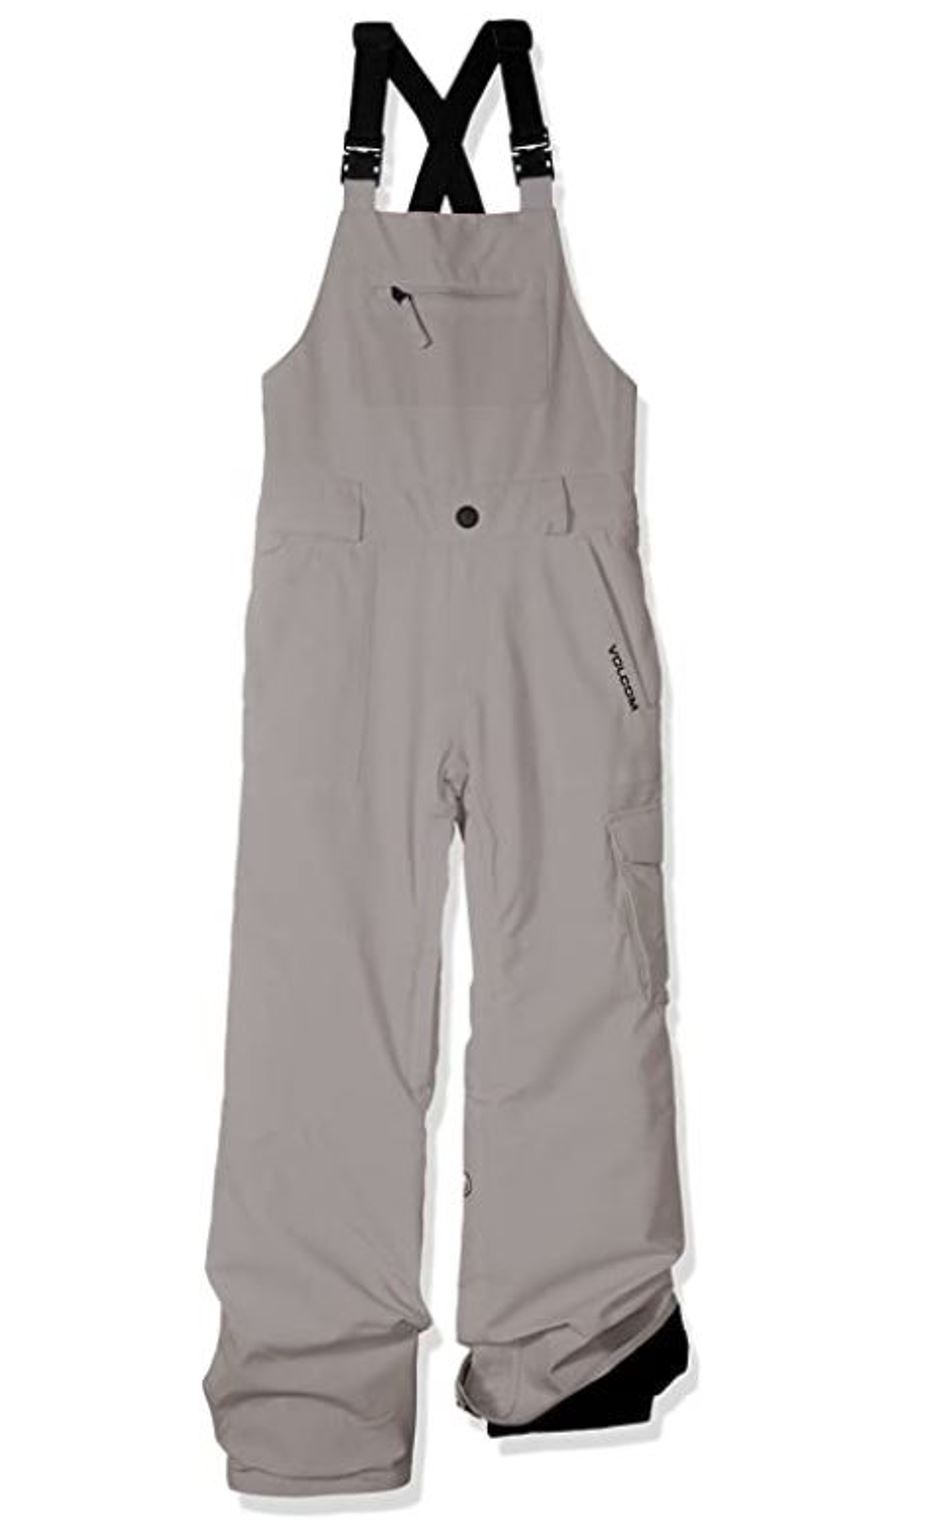 Volcom Kinder Snowpants Sutton ins Overall